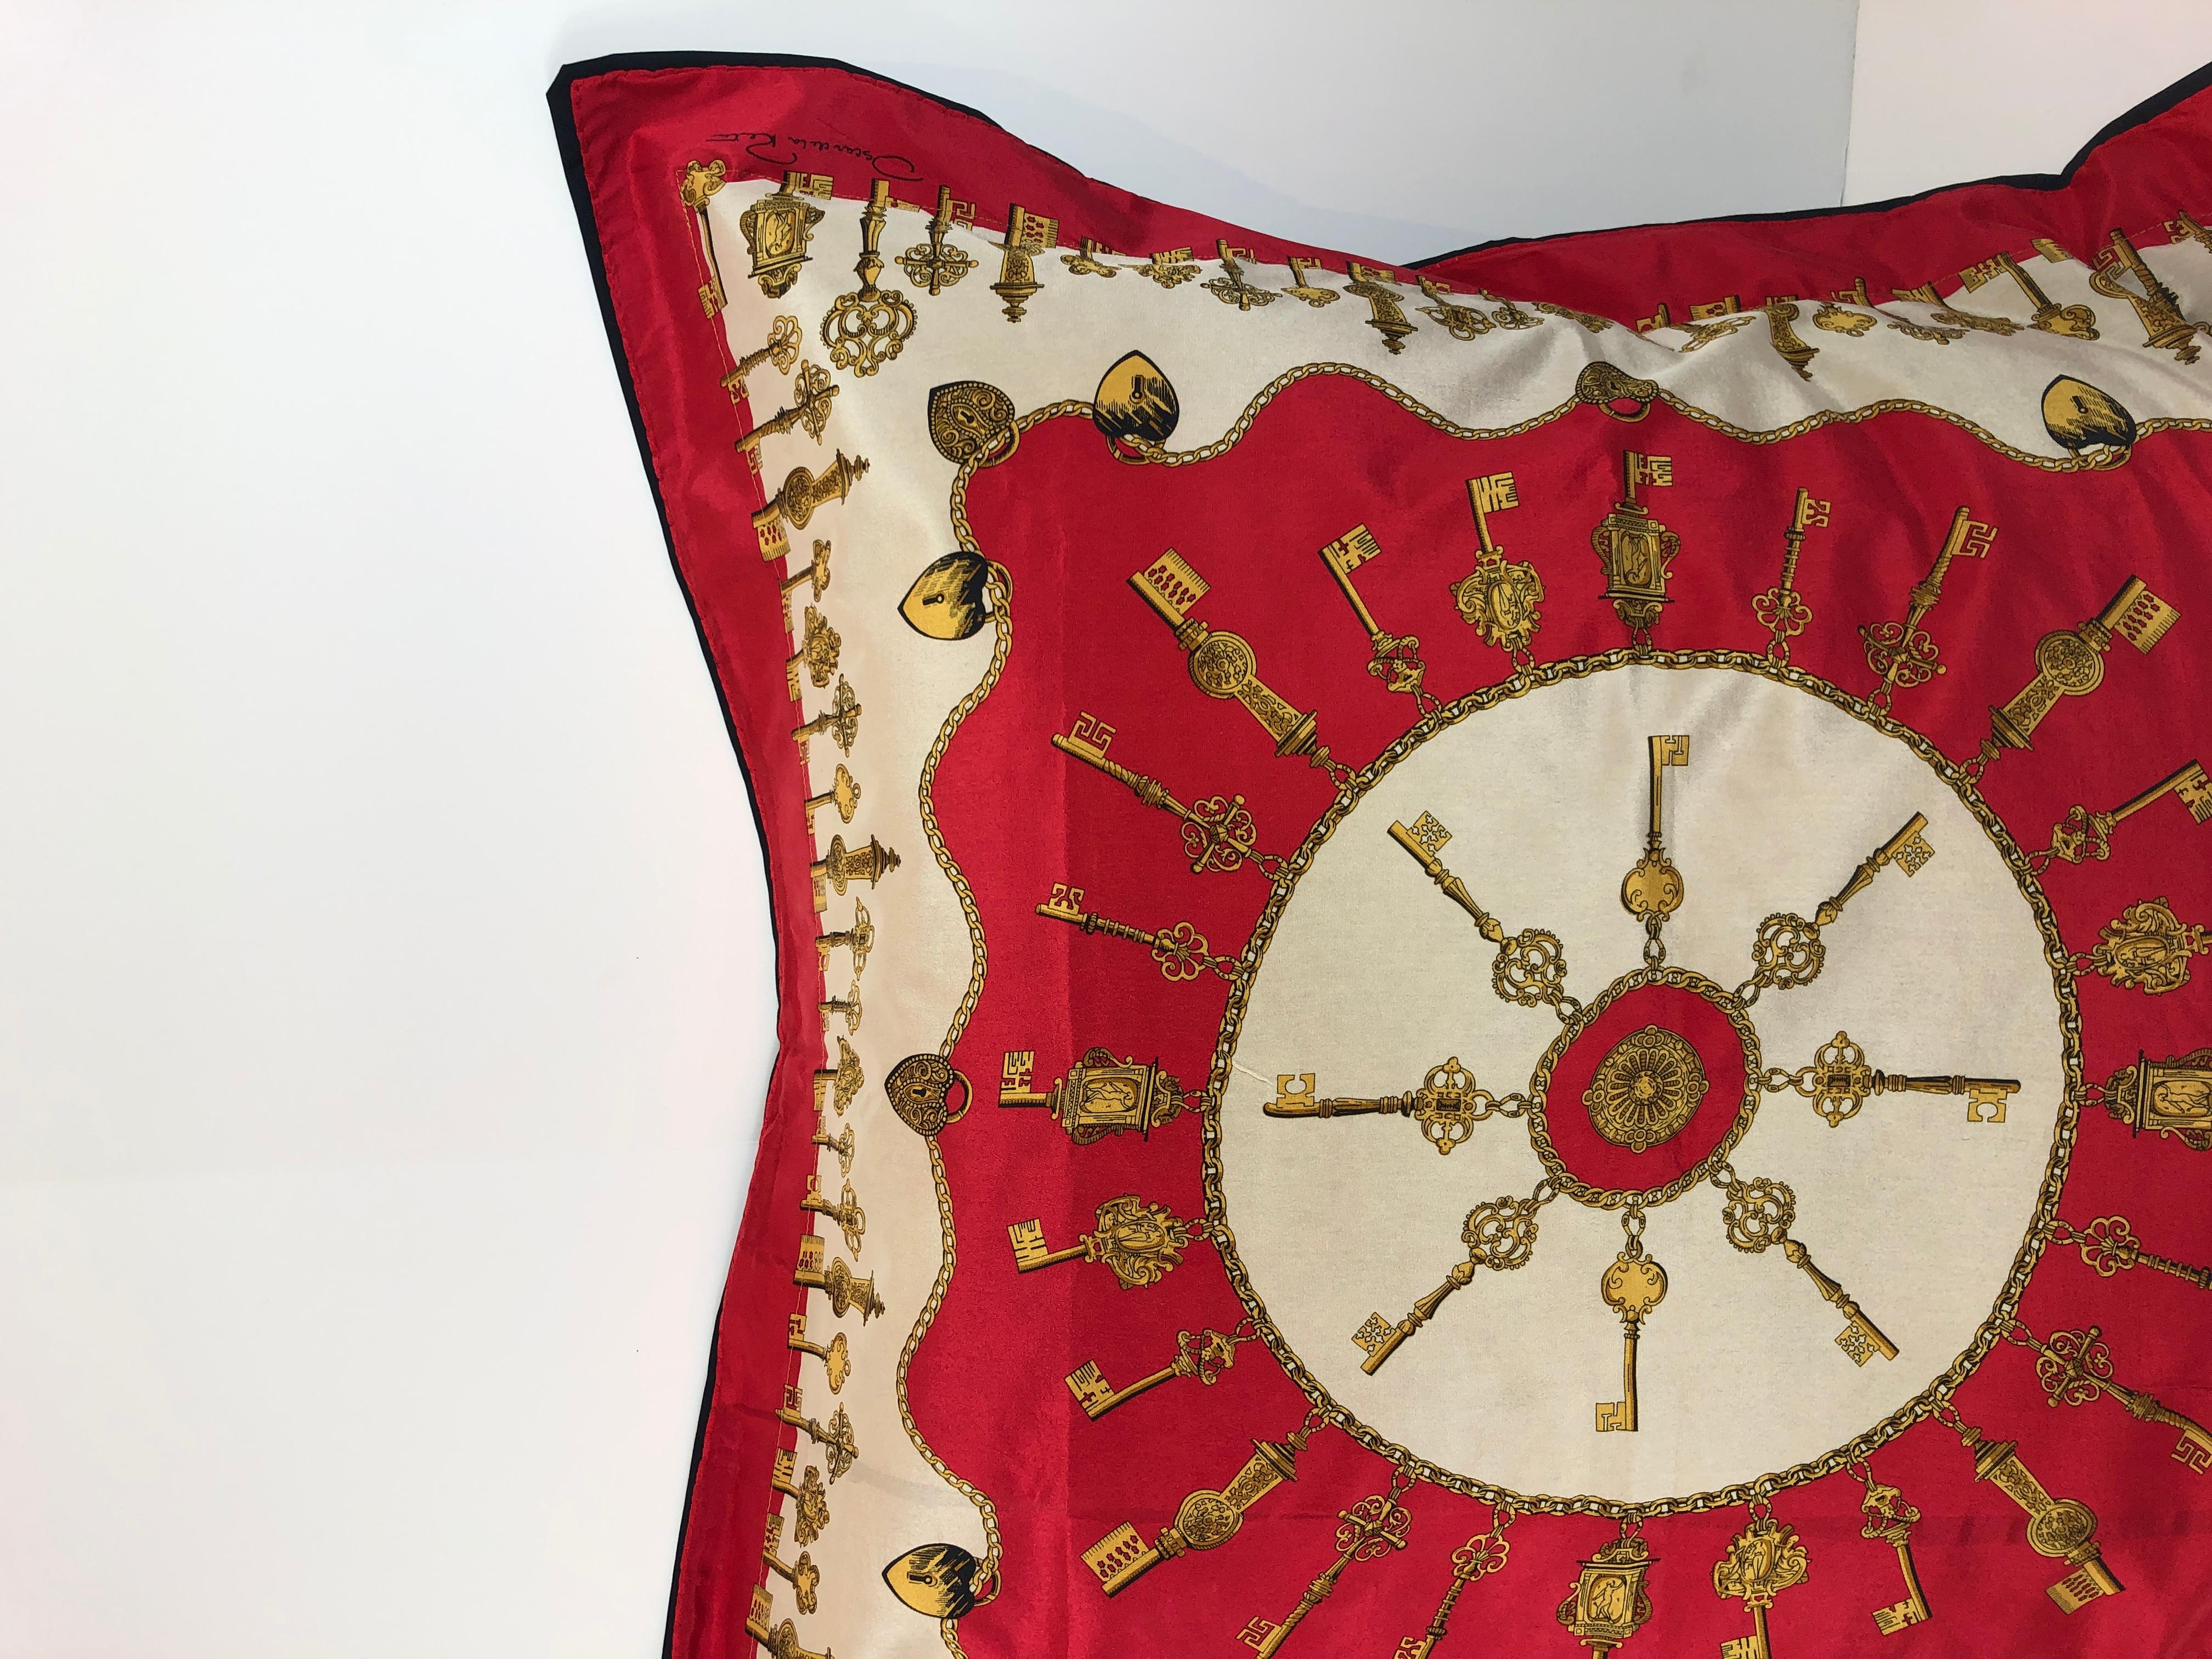 20th Century Oscar De La Renta Silk Scarf in Red, Gold, White & Black and Upholstered Pillow For Sale